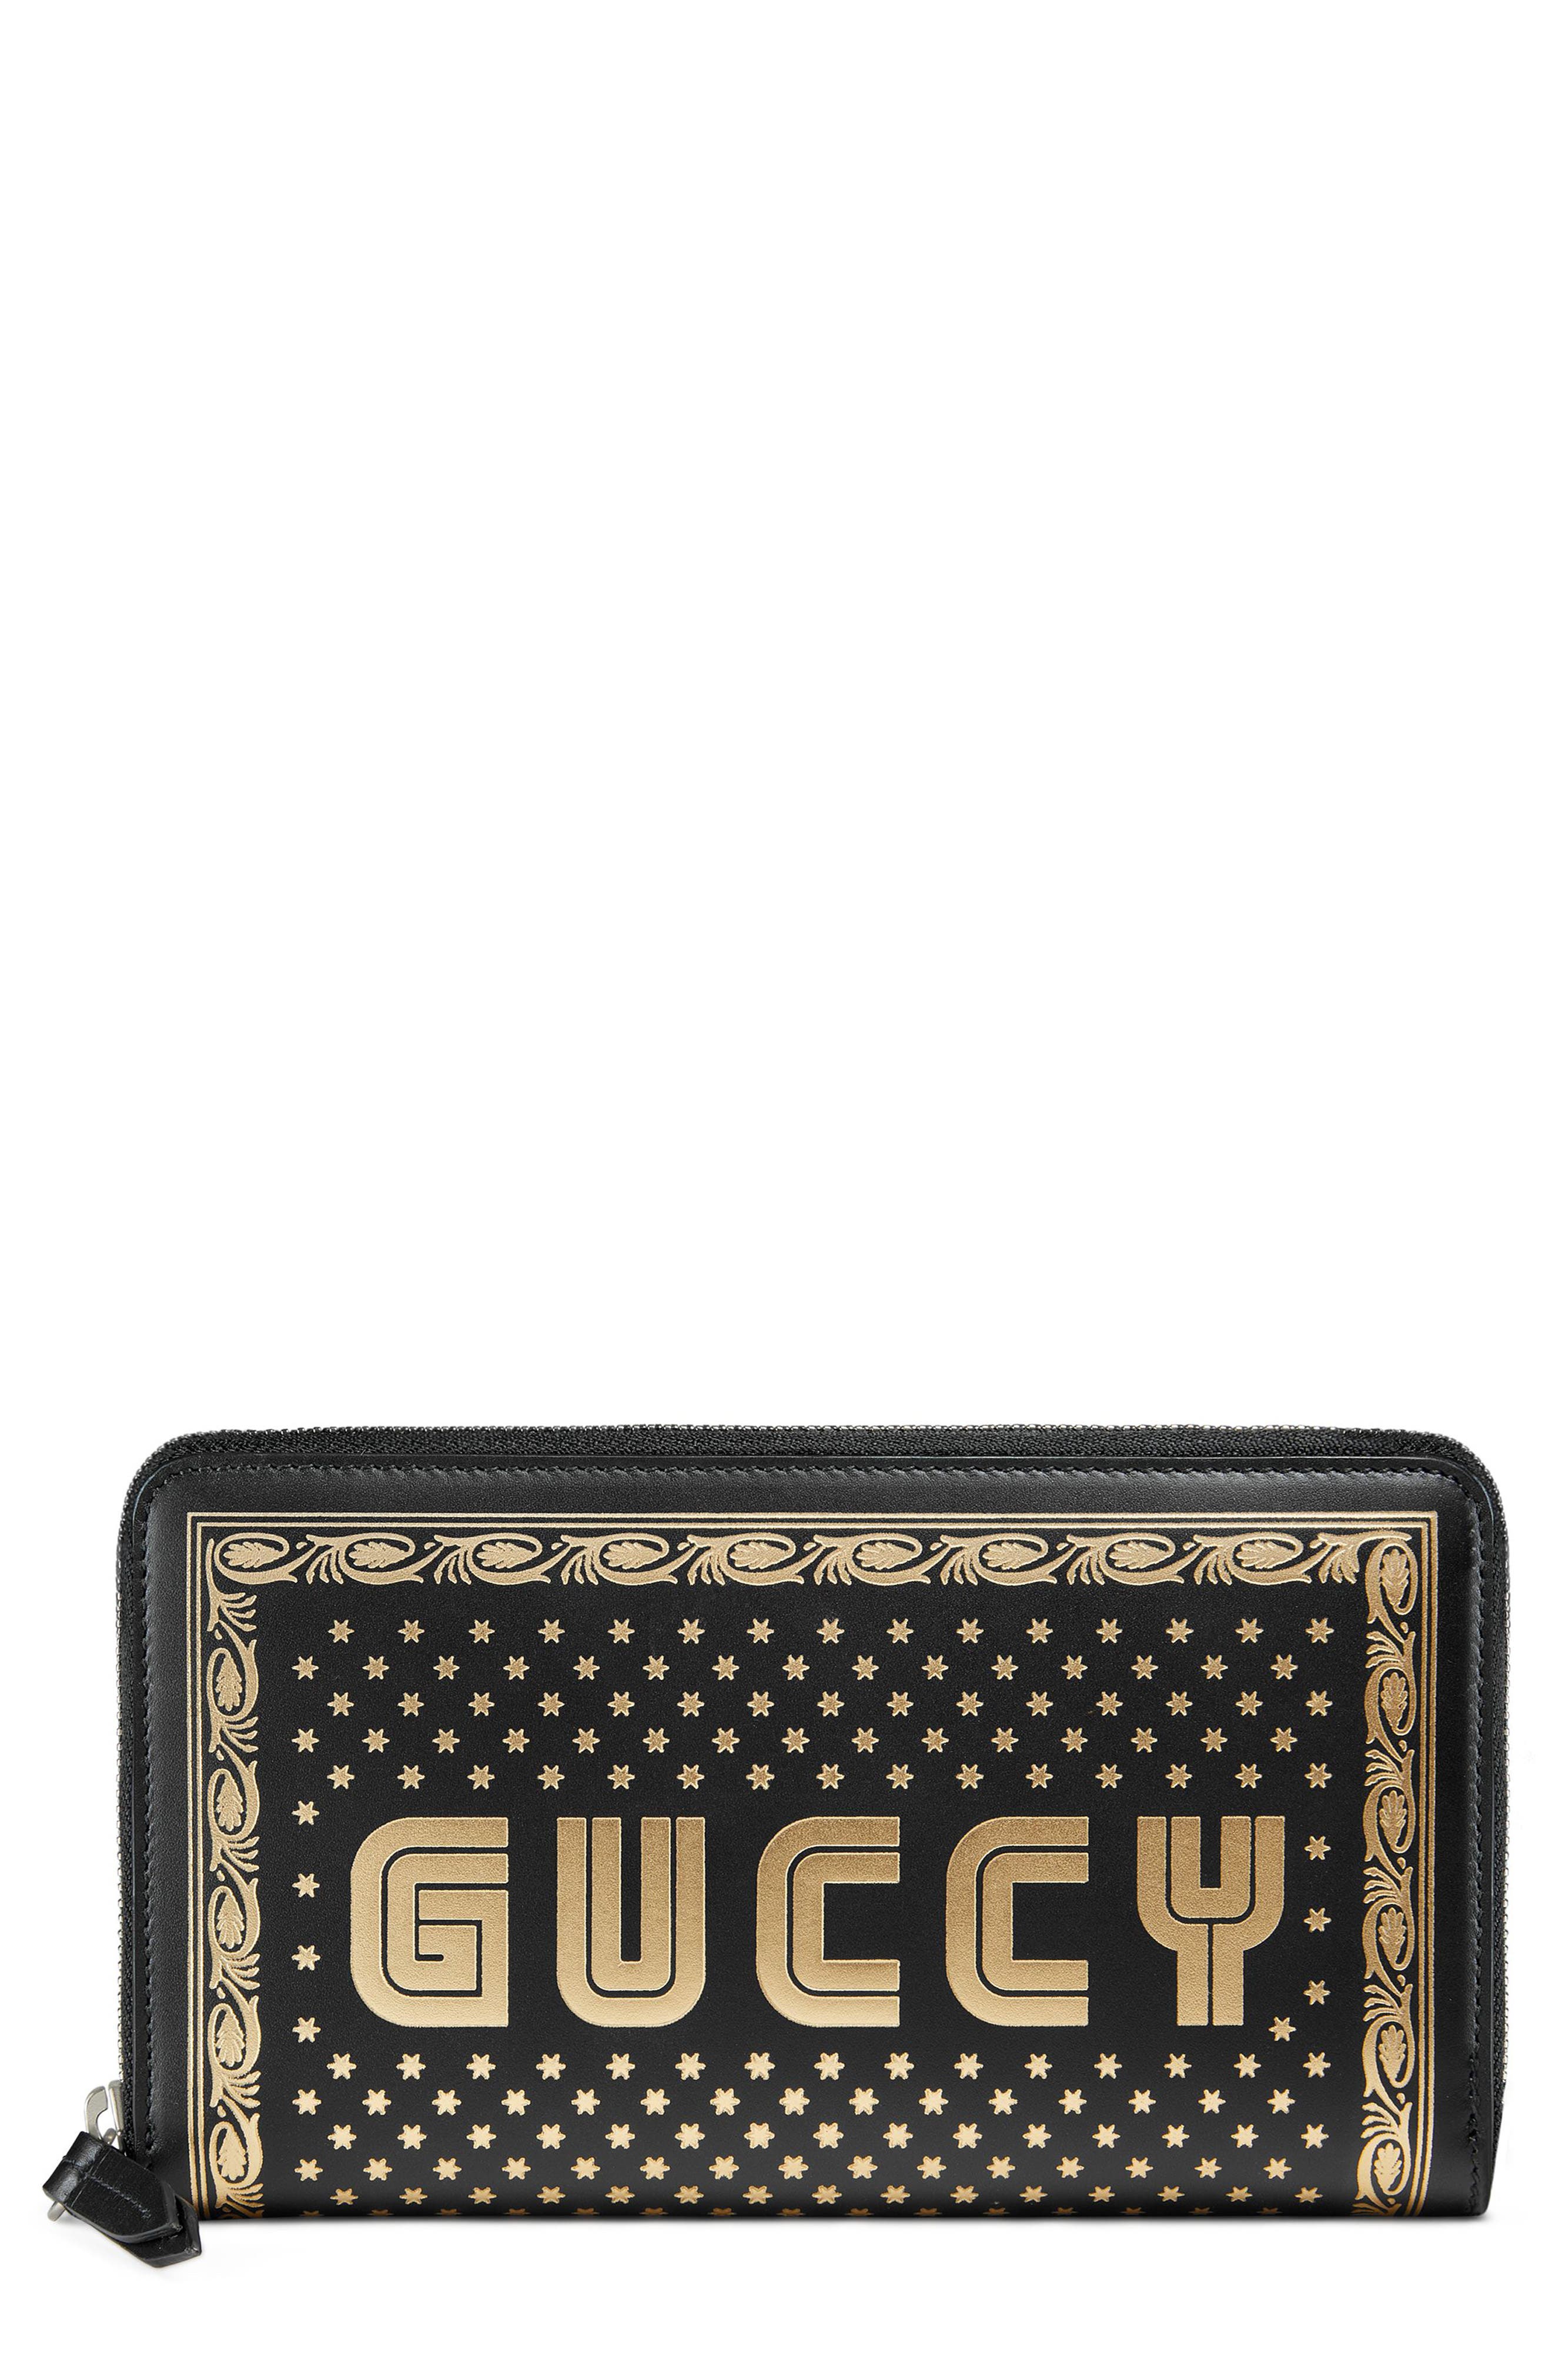 gucci guccy wallet